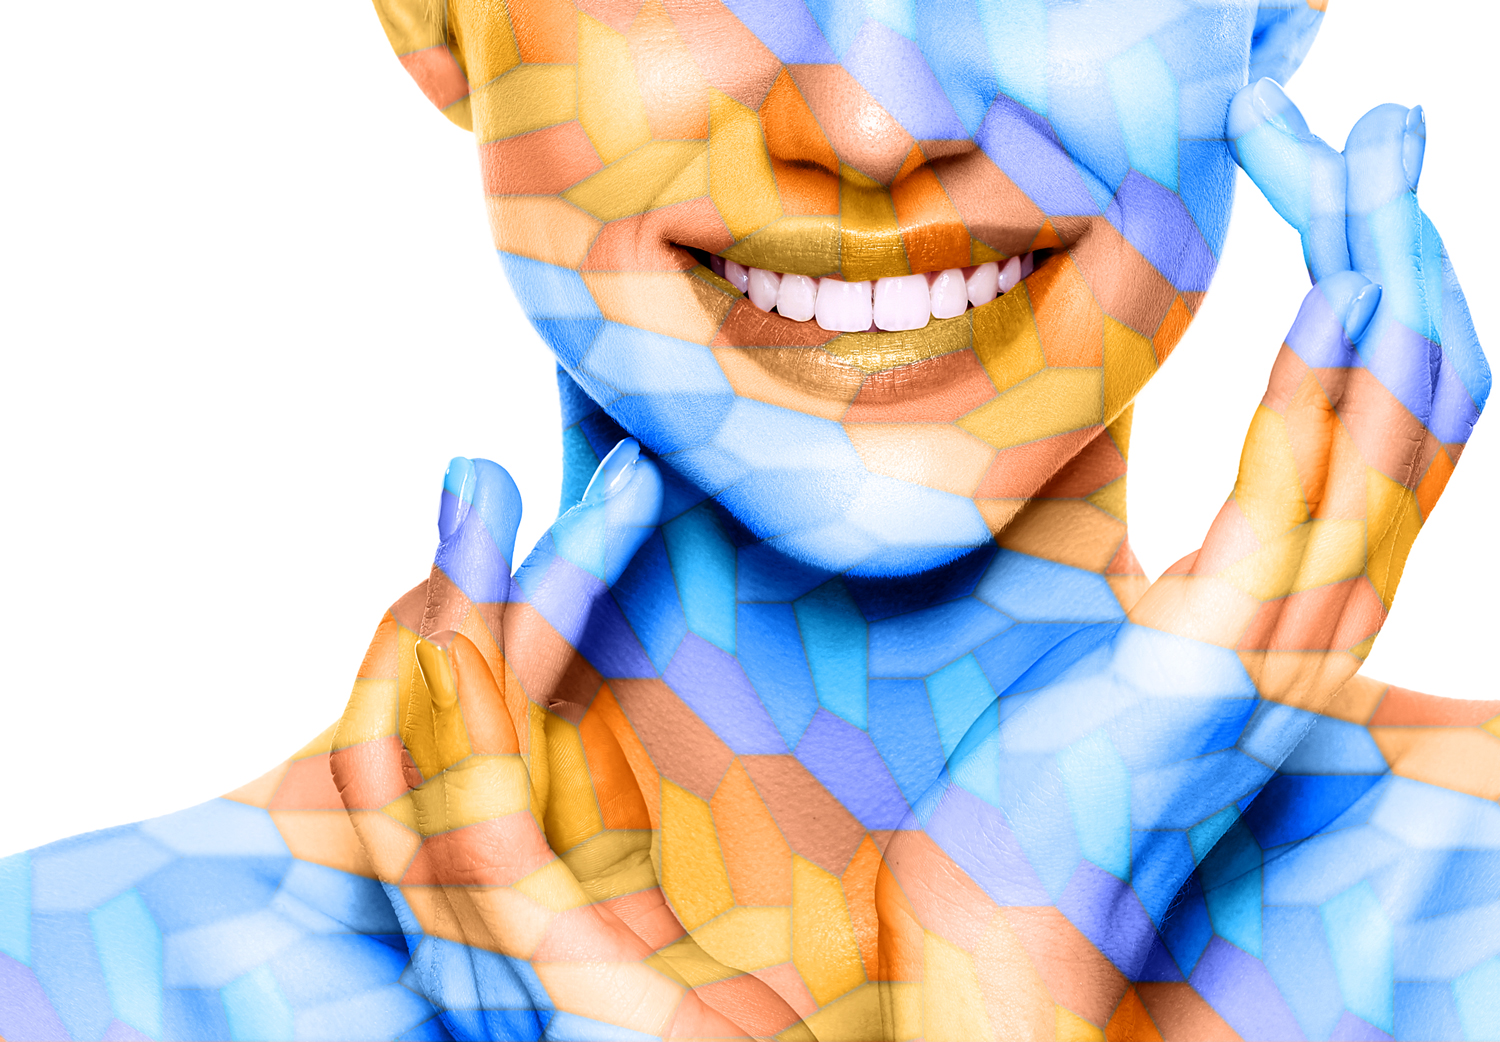 Model with the pattern removed from her teeth via a Photoshop mask